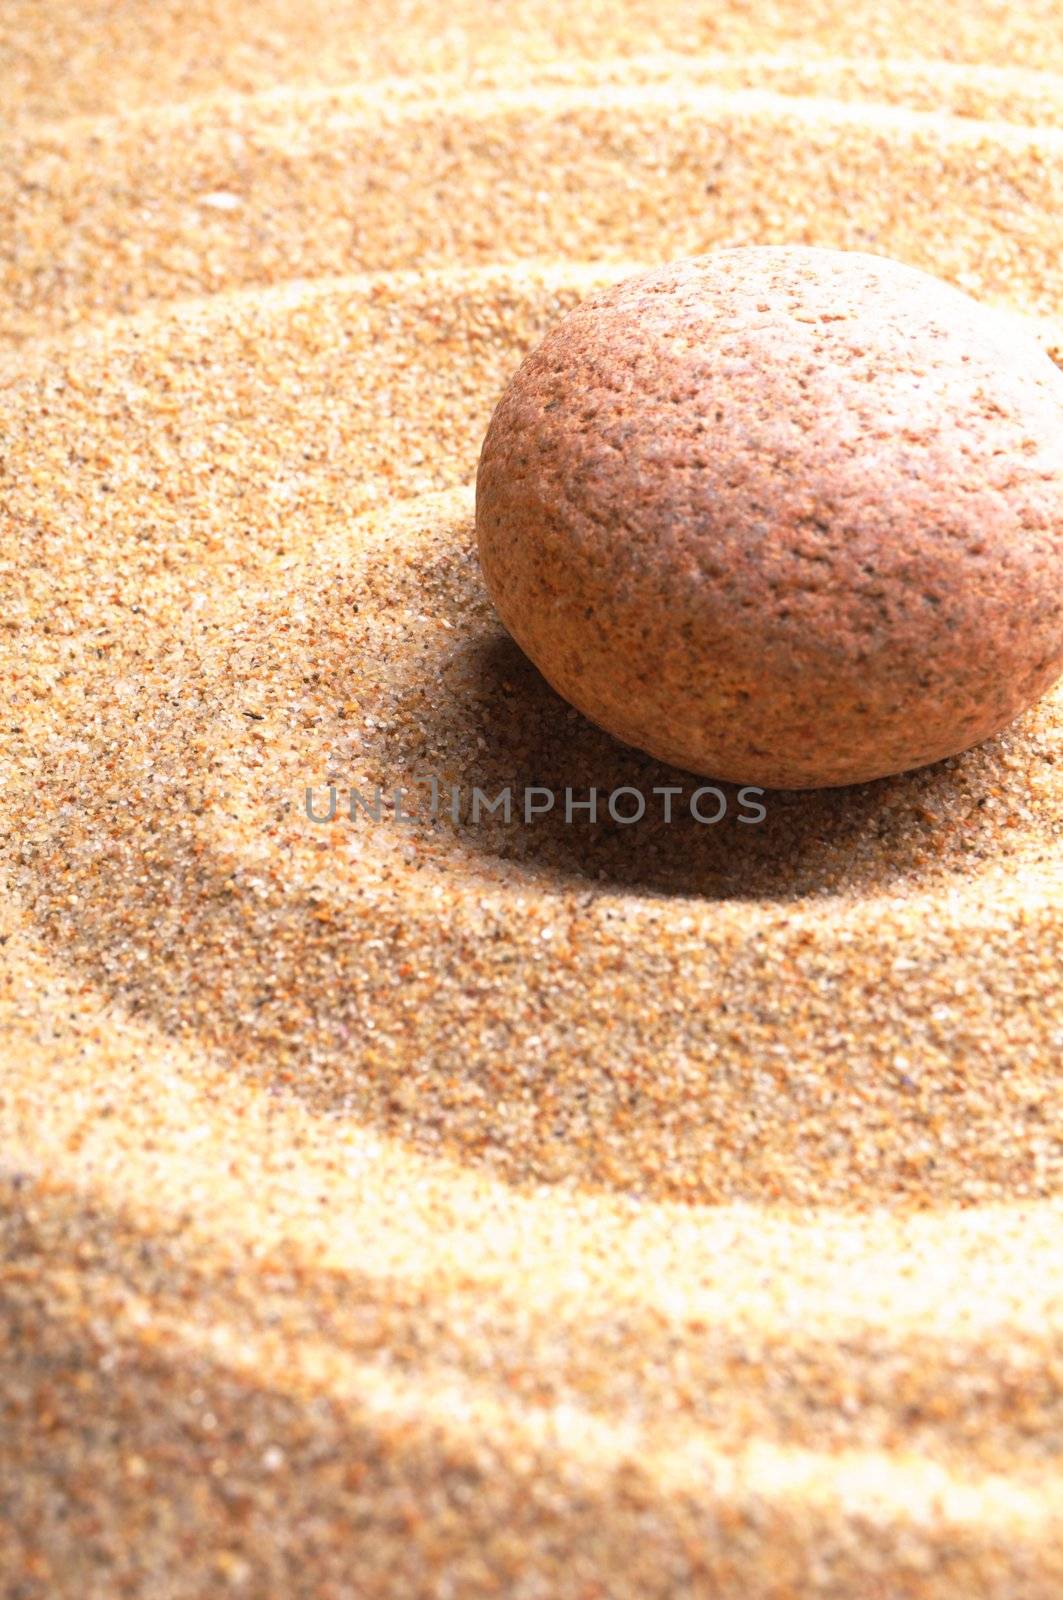 zen stone with leaf on sand showing spa concept